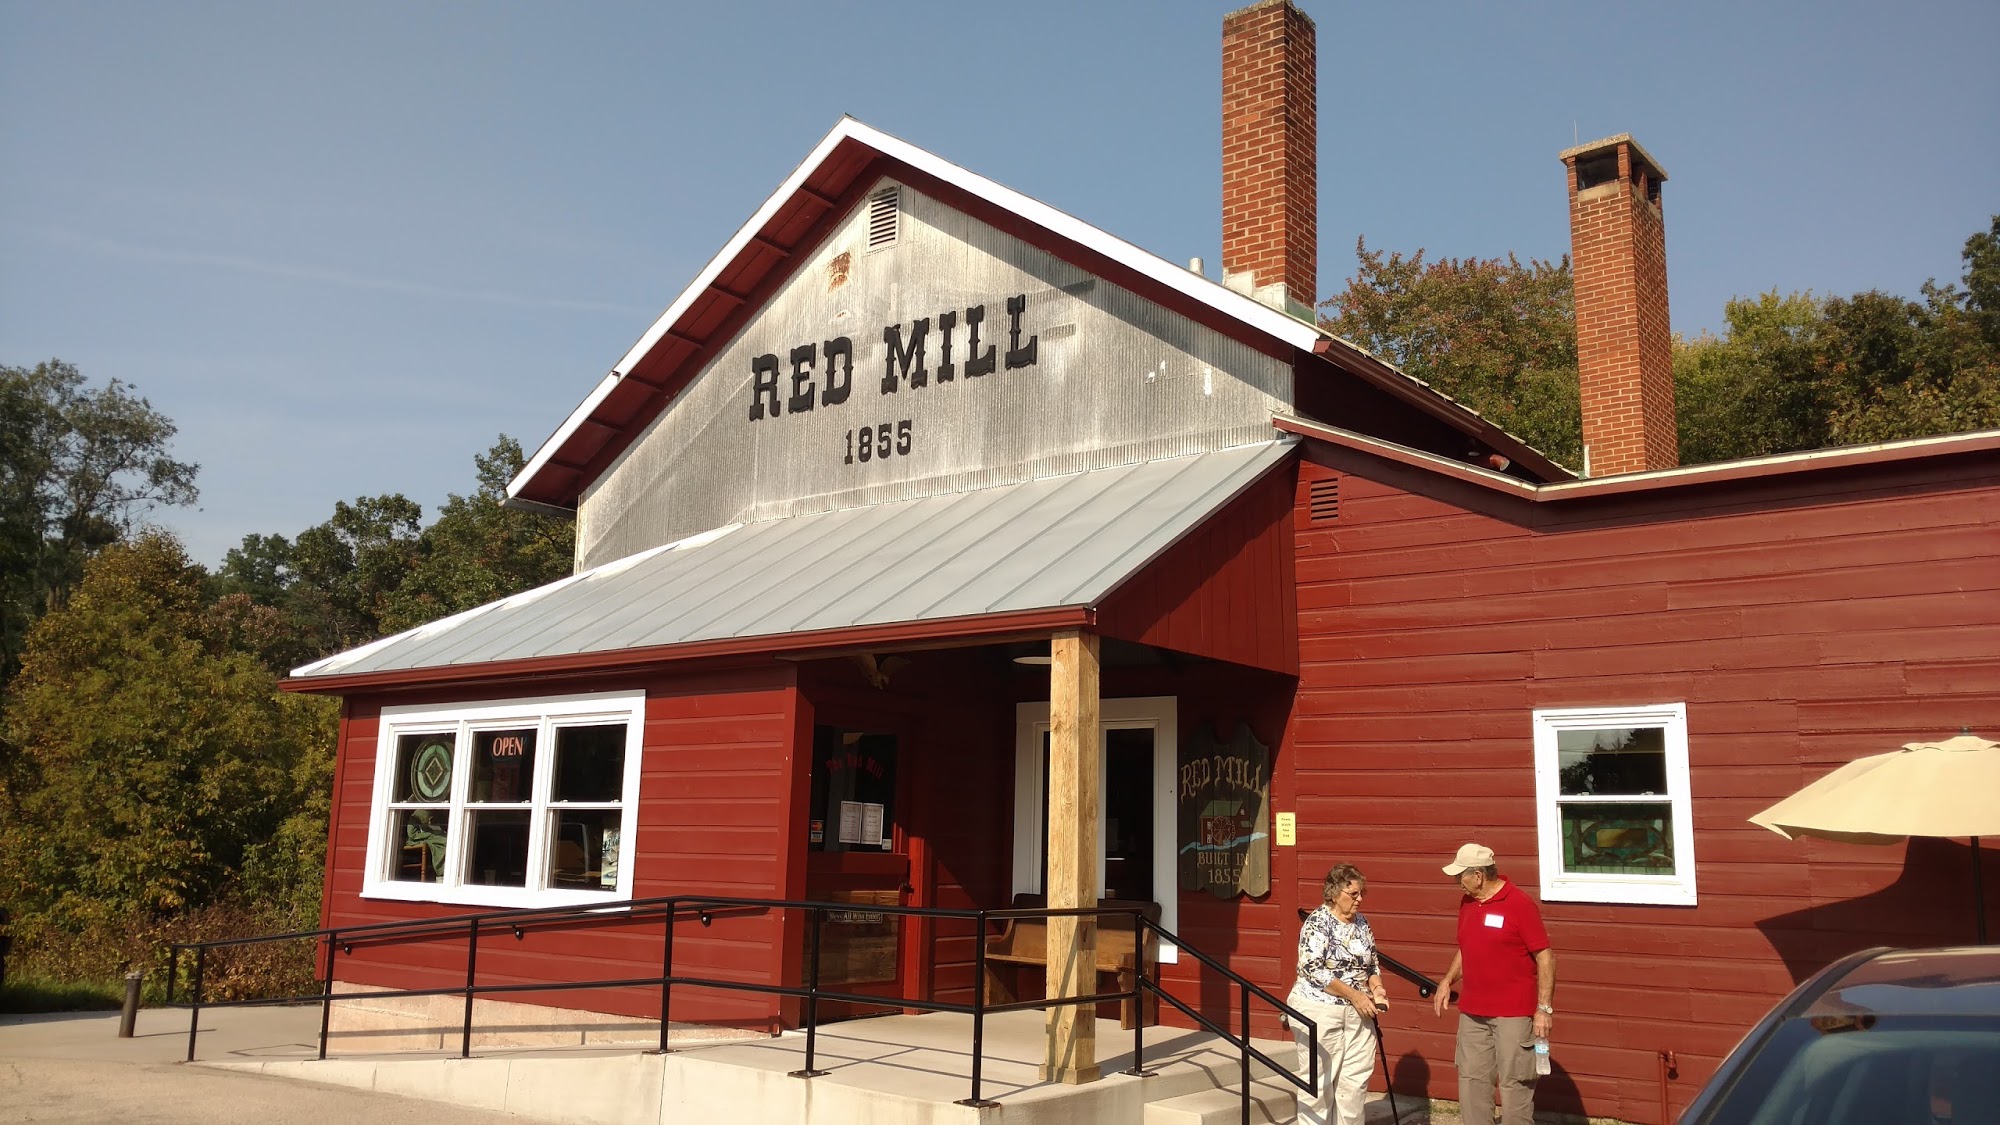 Red Mill Gift Shop, Coffee Shop, Ice Cream Parlor & Wedding Chapel